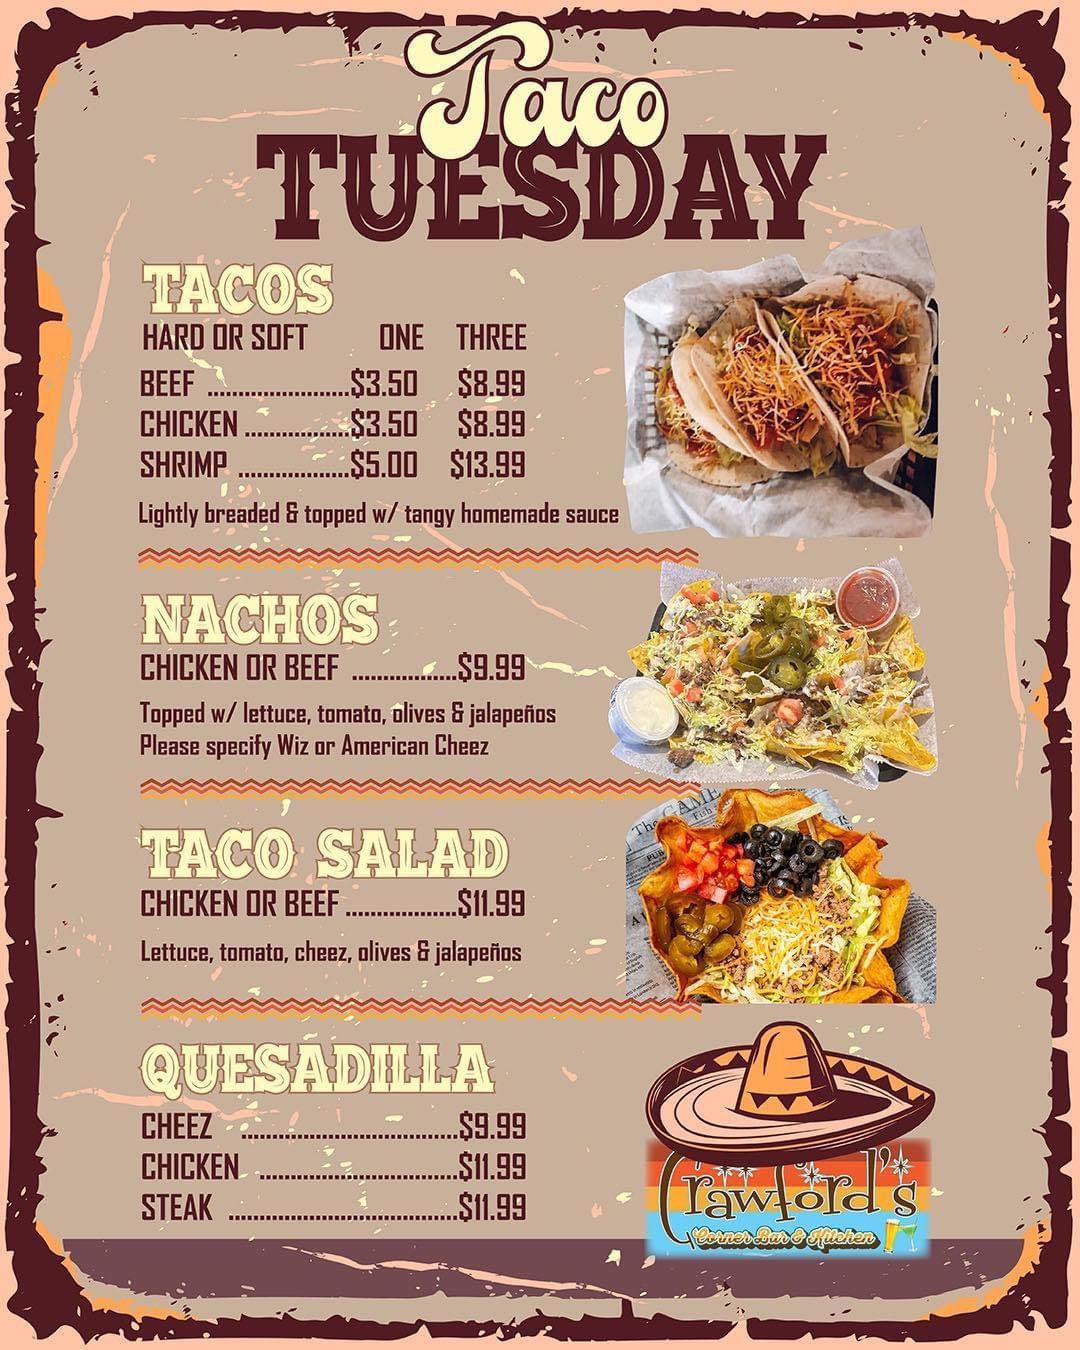 A colorful taco tuesday menu featuring various taco options with prices and images of taco meals, set against a textured, orange background with decorative elements.